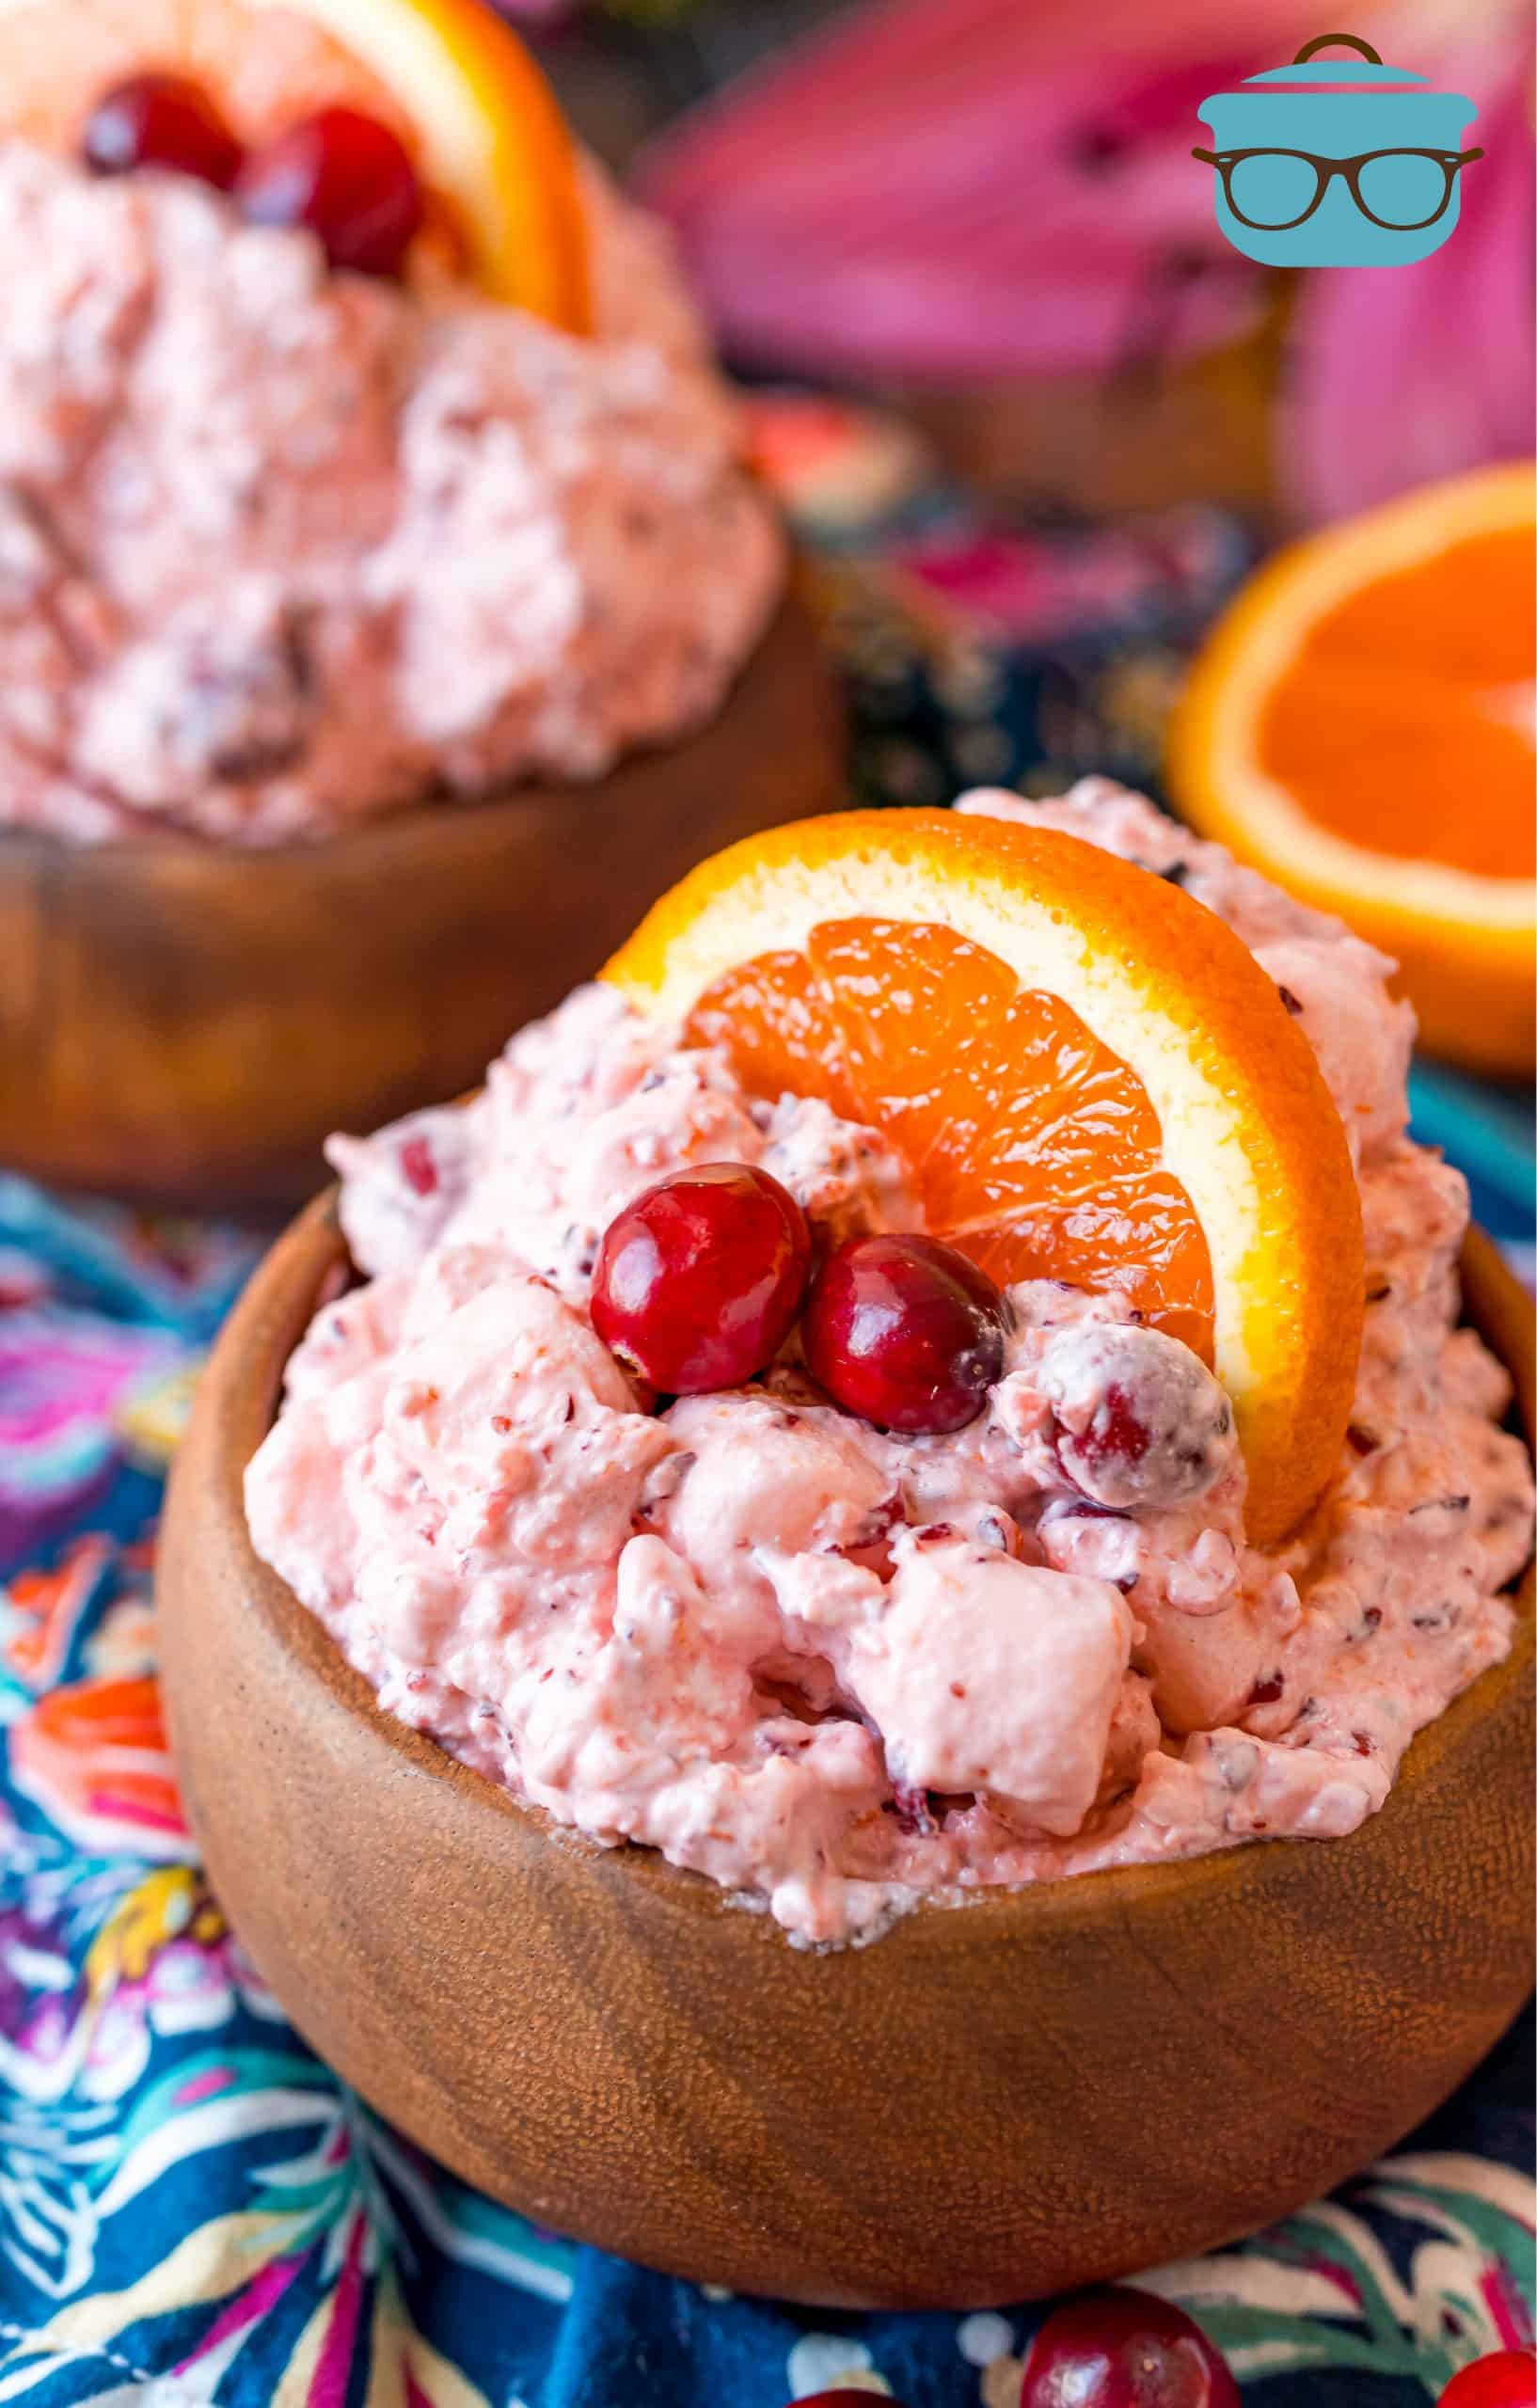 Cranberry Orange Fluff shown in small wood bowls and topped with a slice of orange and fresh cranberry.